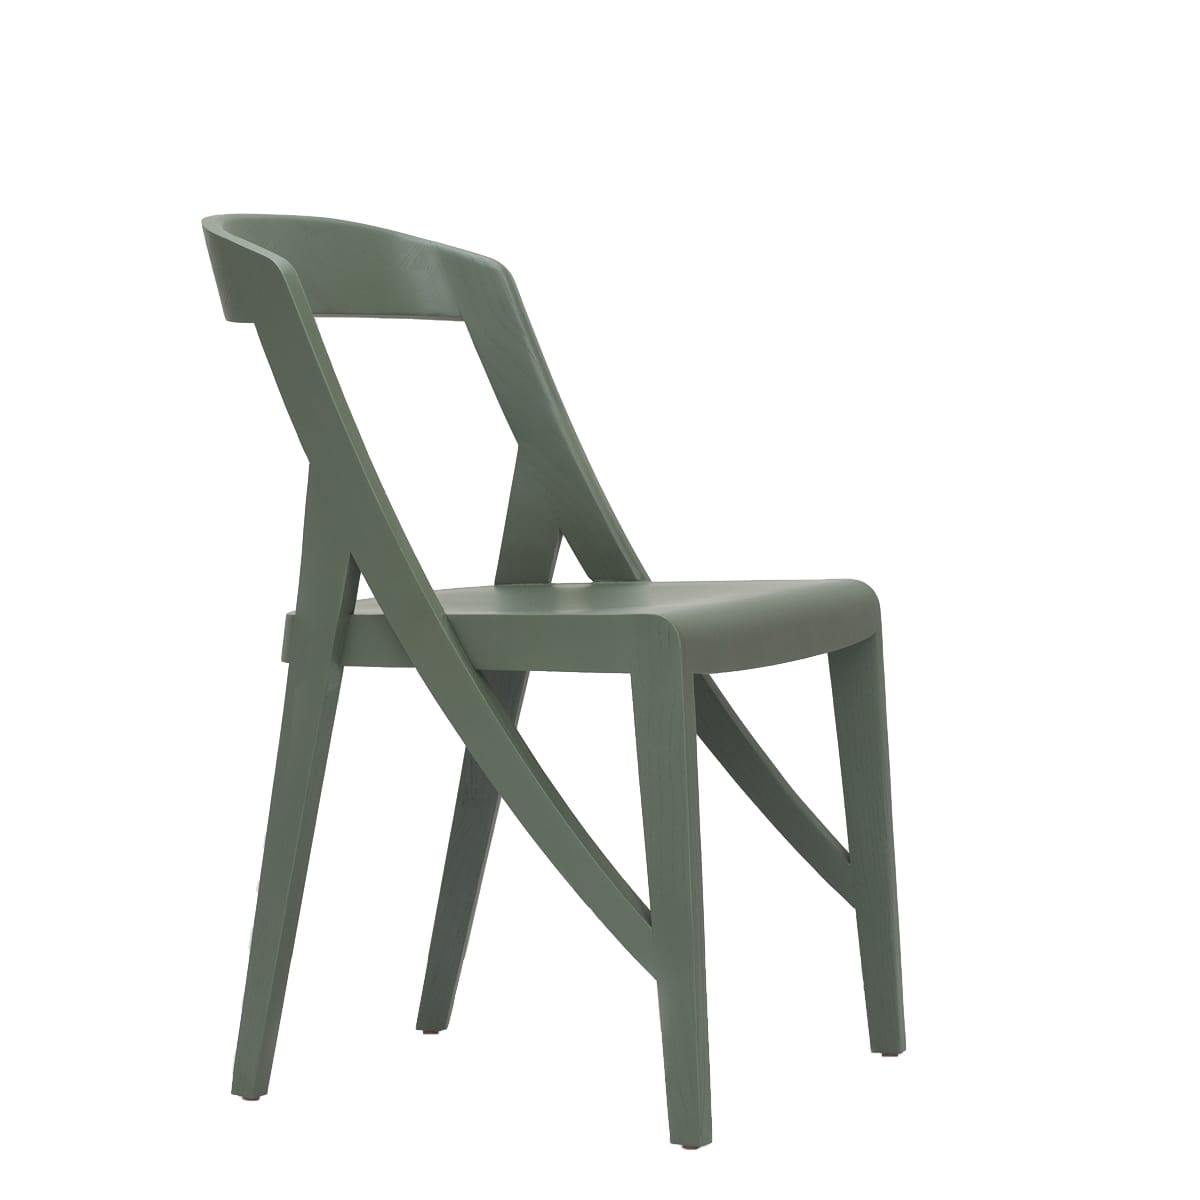 Brida Chair - without armrest - GIR